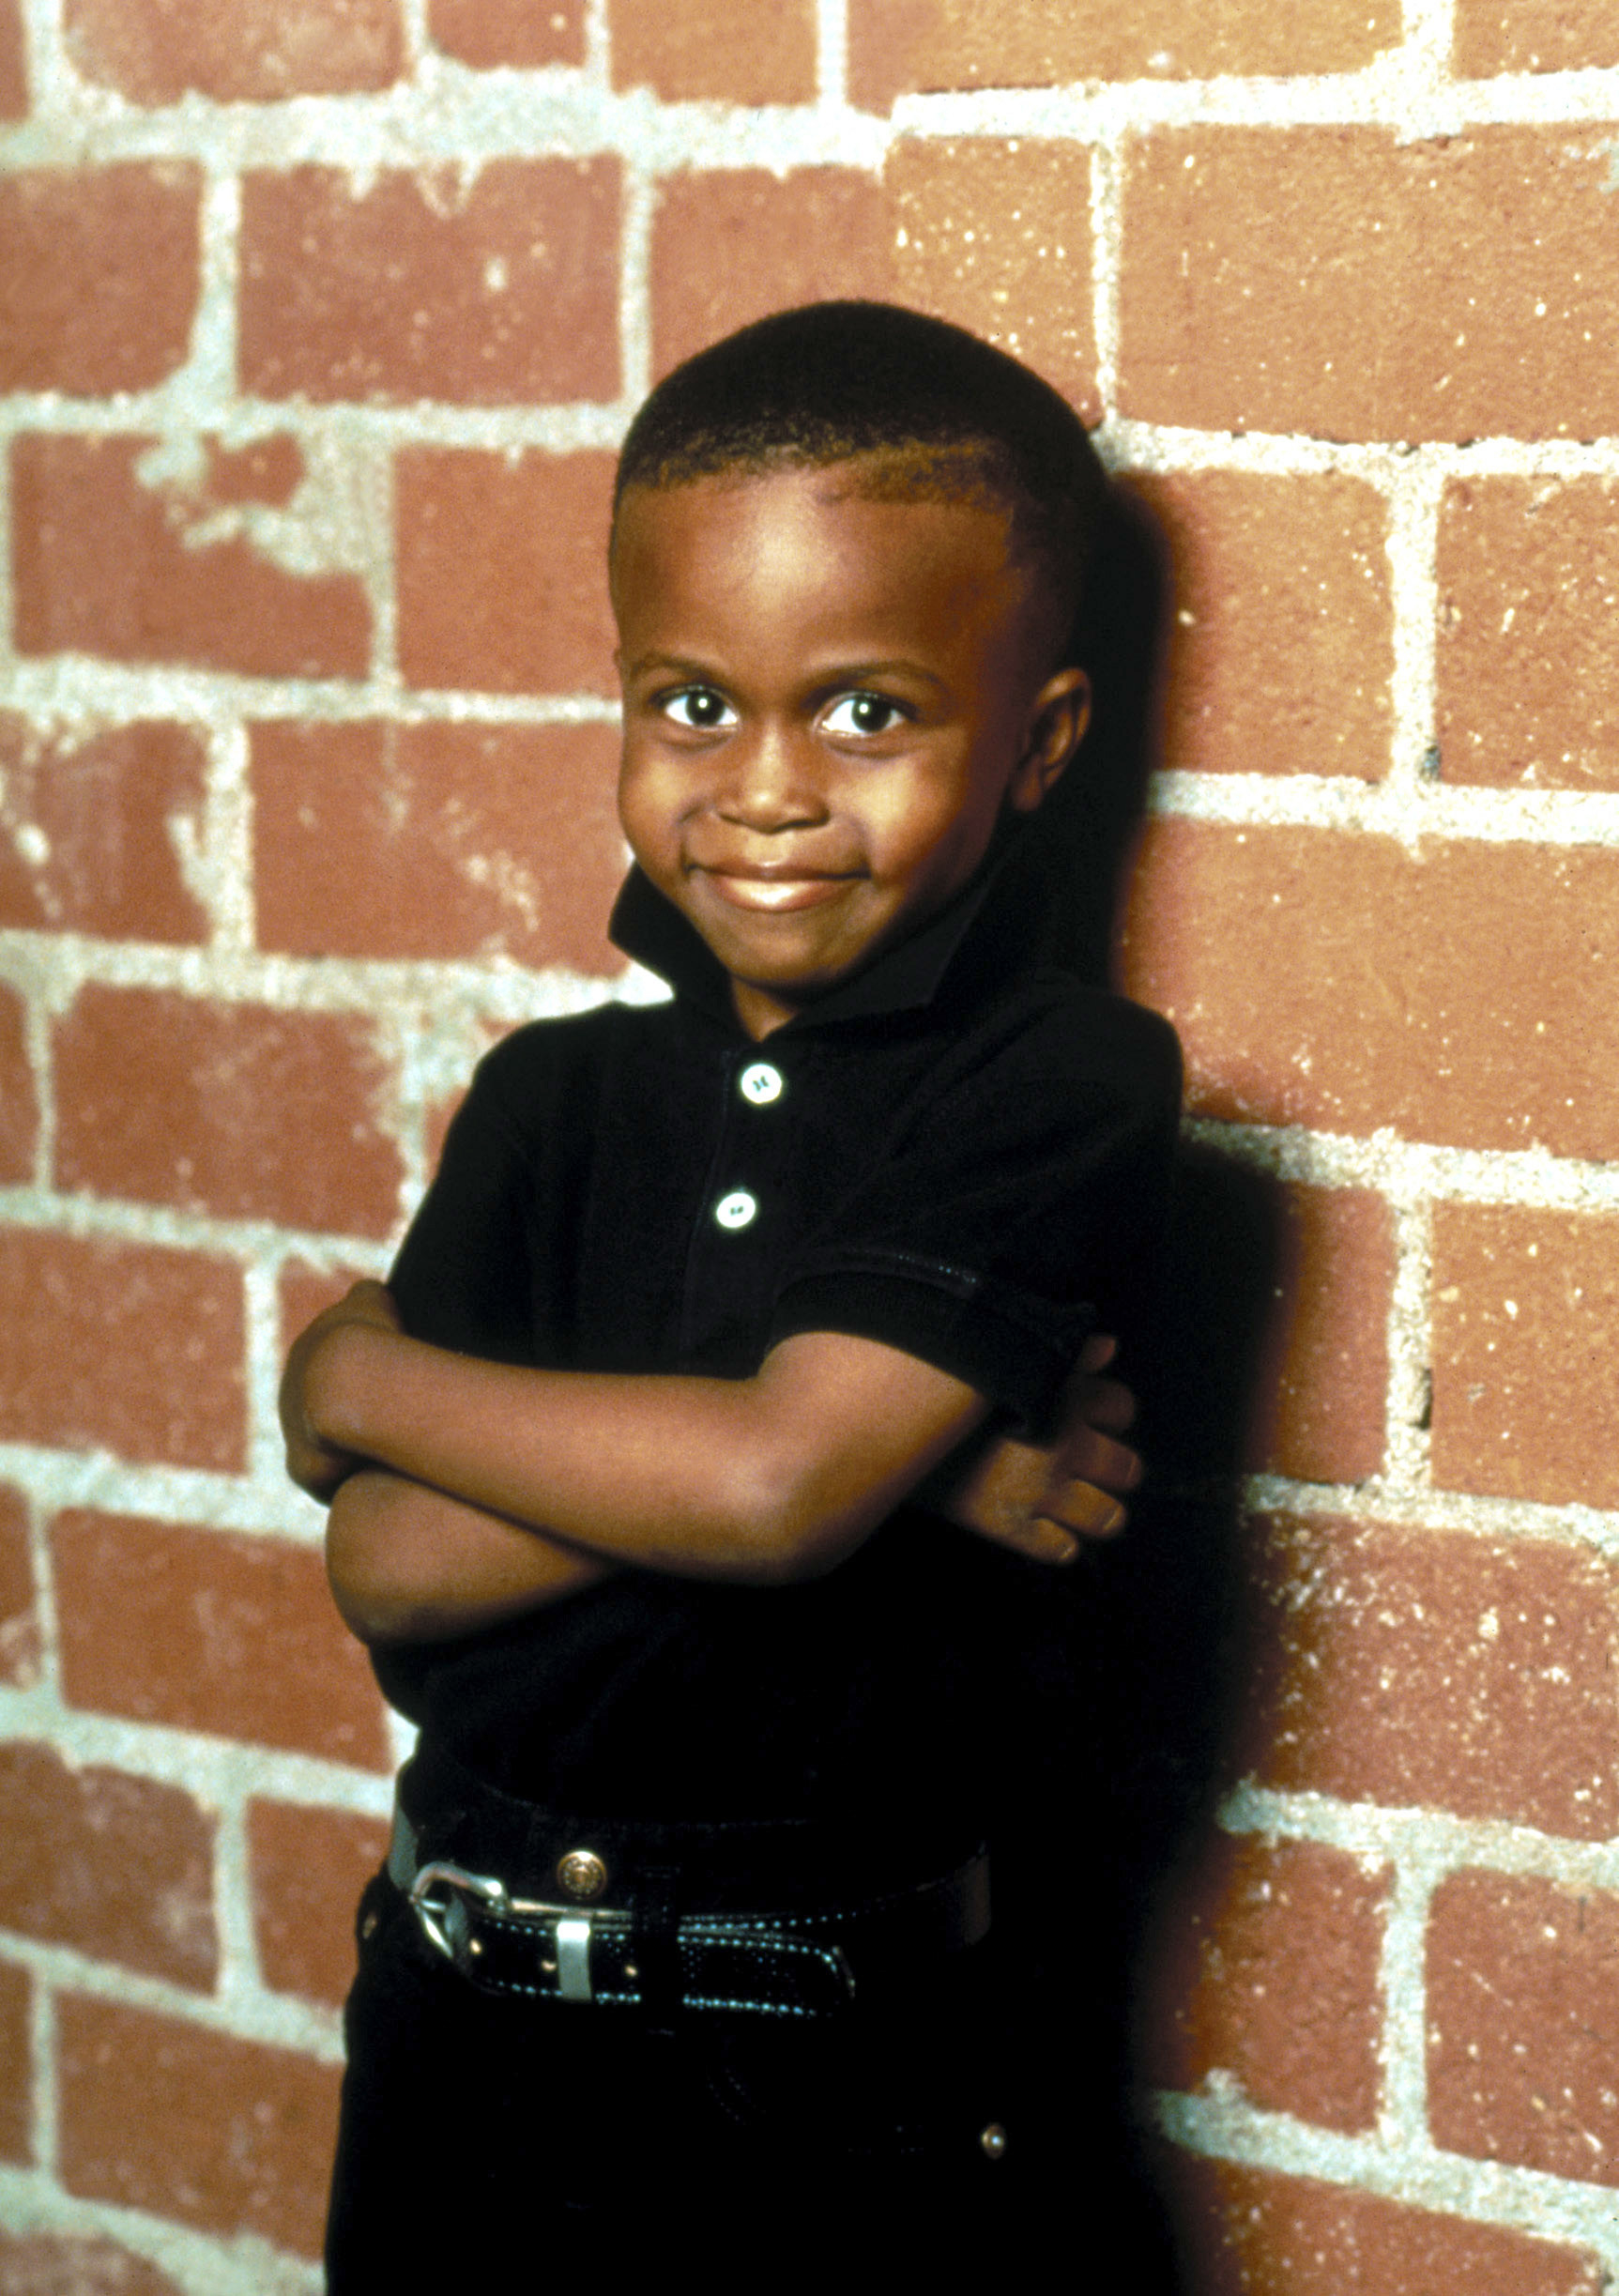 Ross as a little boy leaning against a brick wall with arms folded